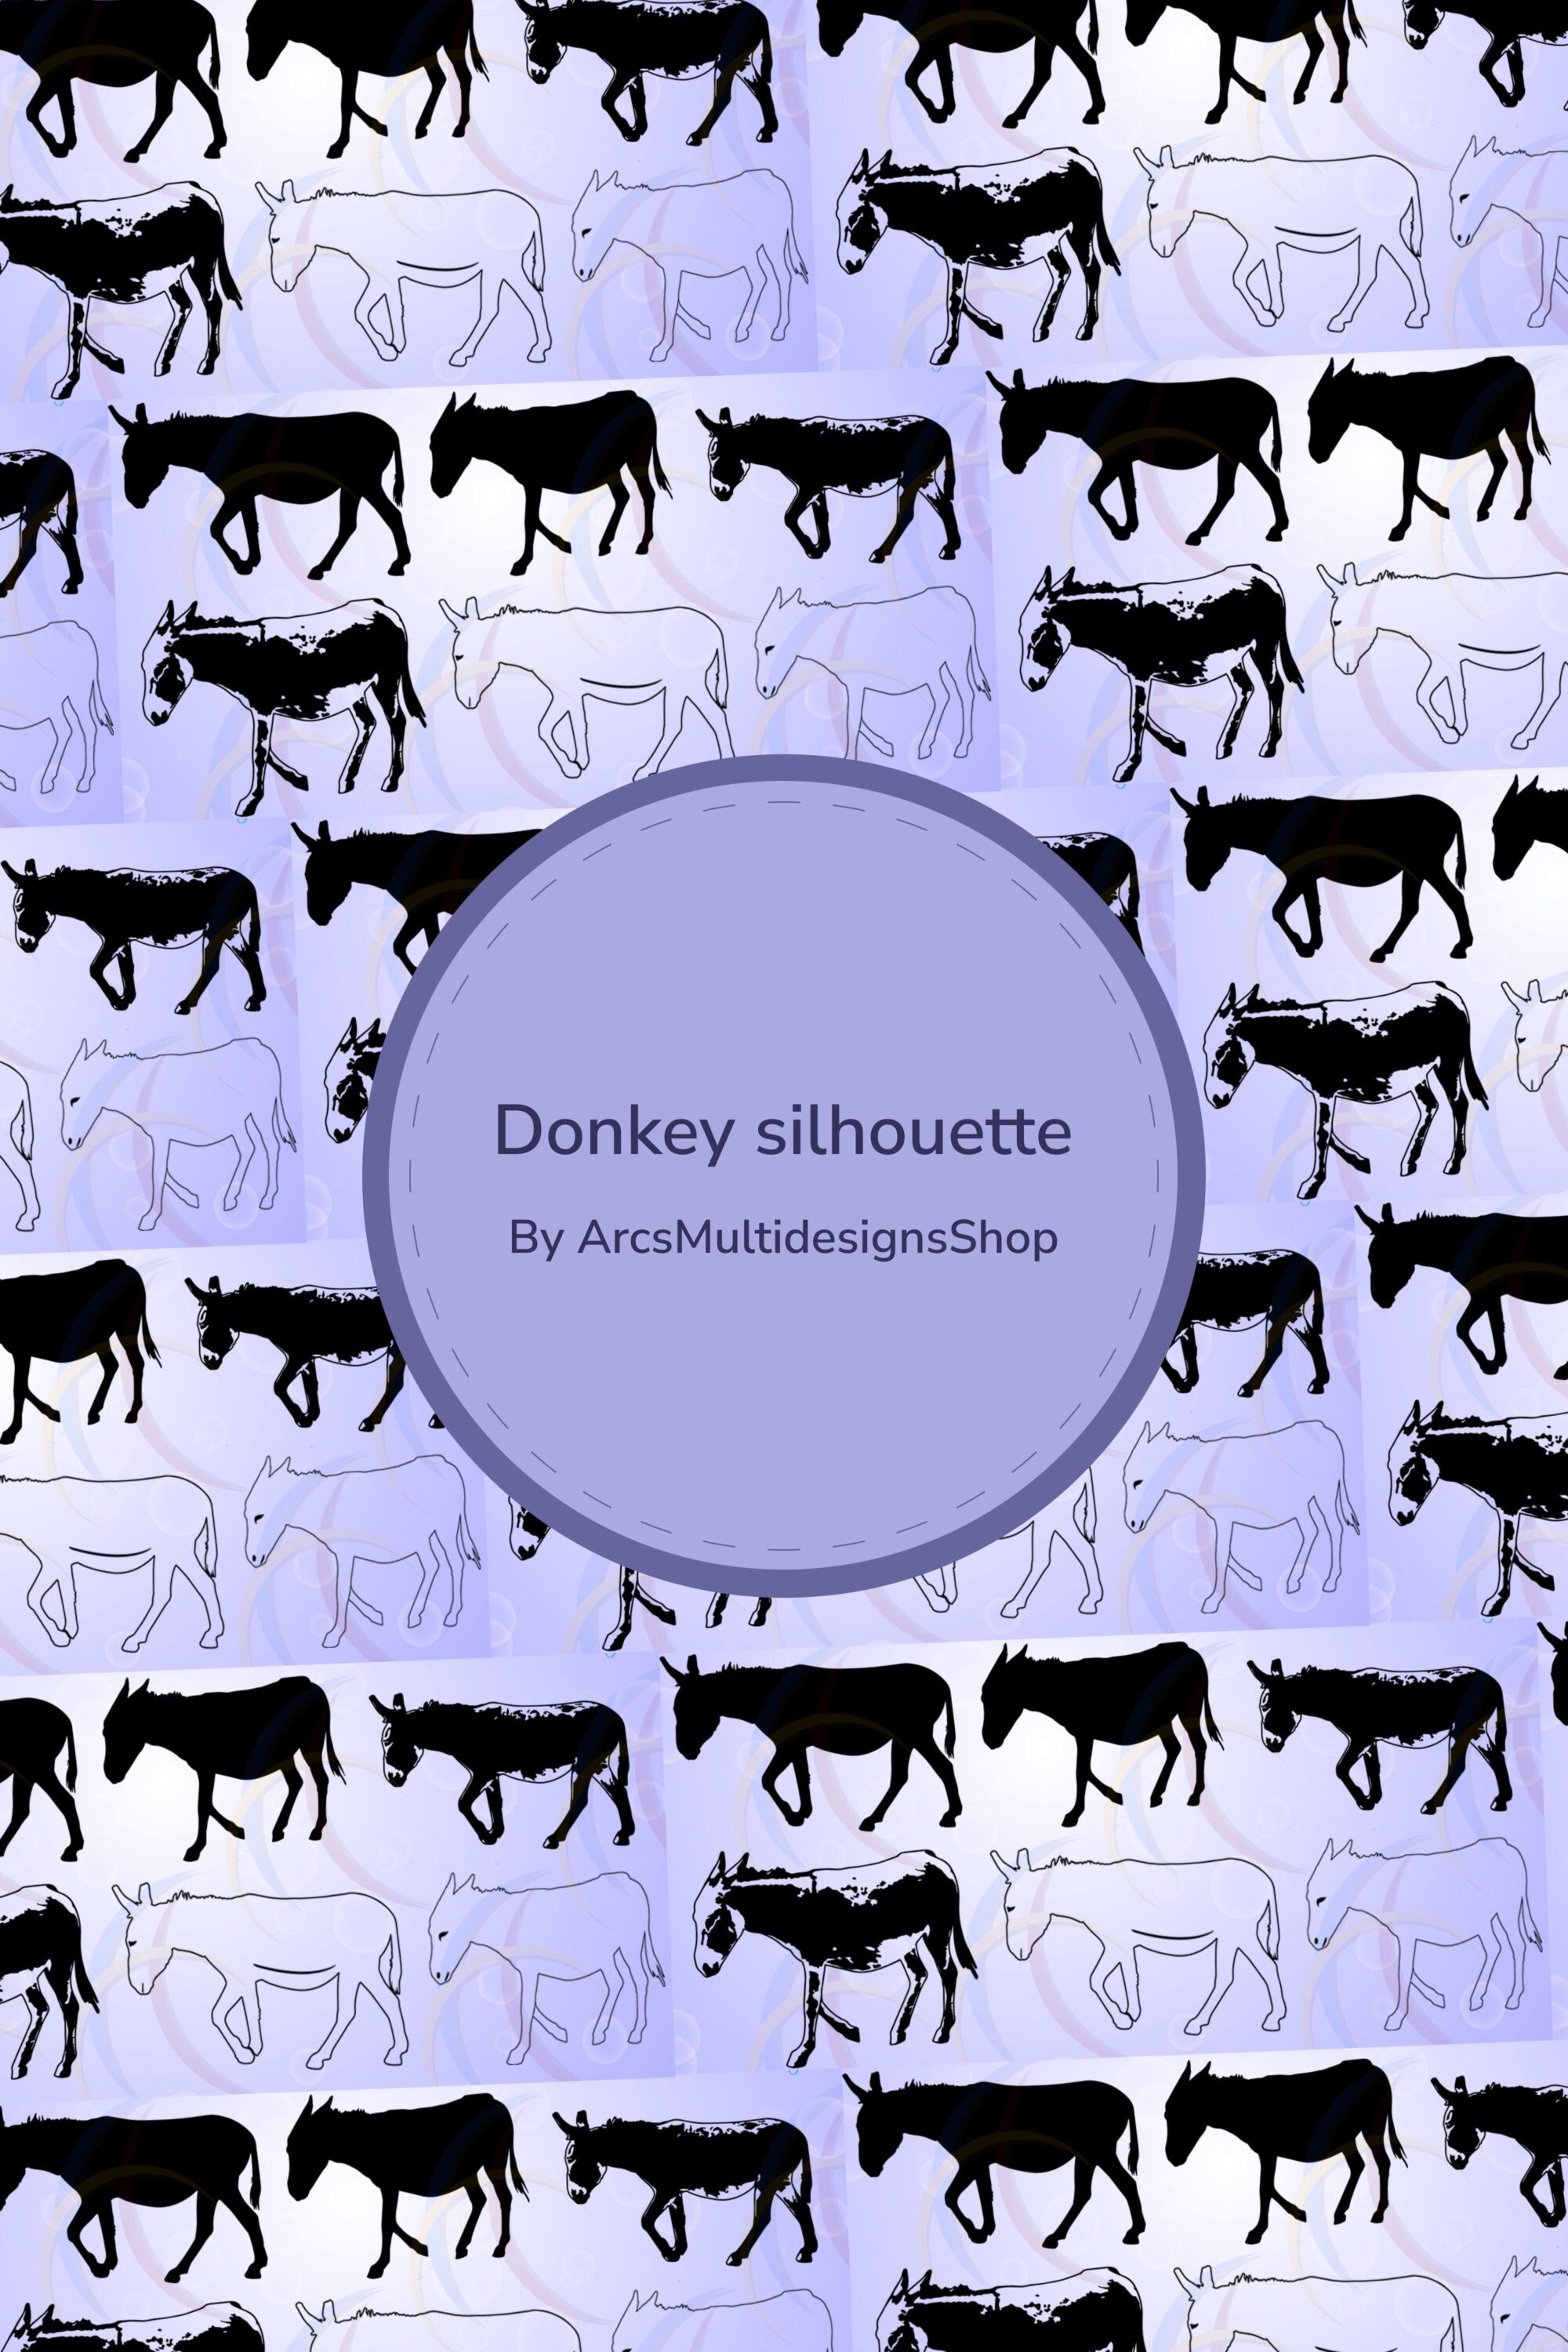 donkey silhouette ass foal jack commercial personal use cricutdiy svg eps dxf png jpg animal silhouettes cameo 03 507